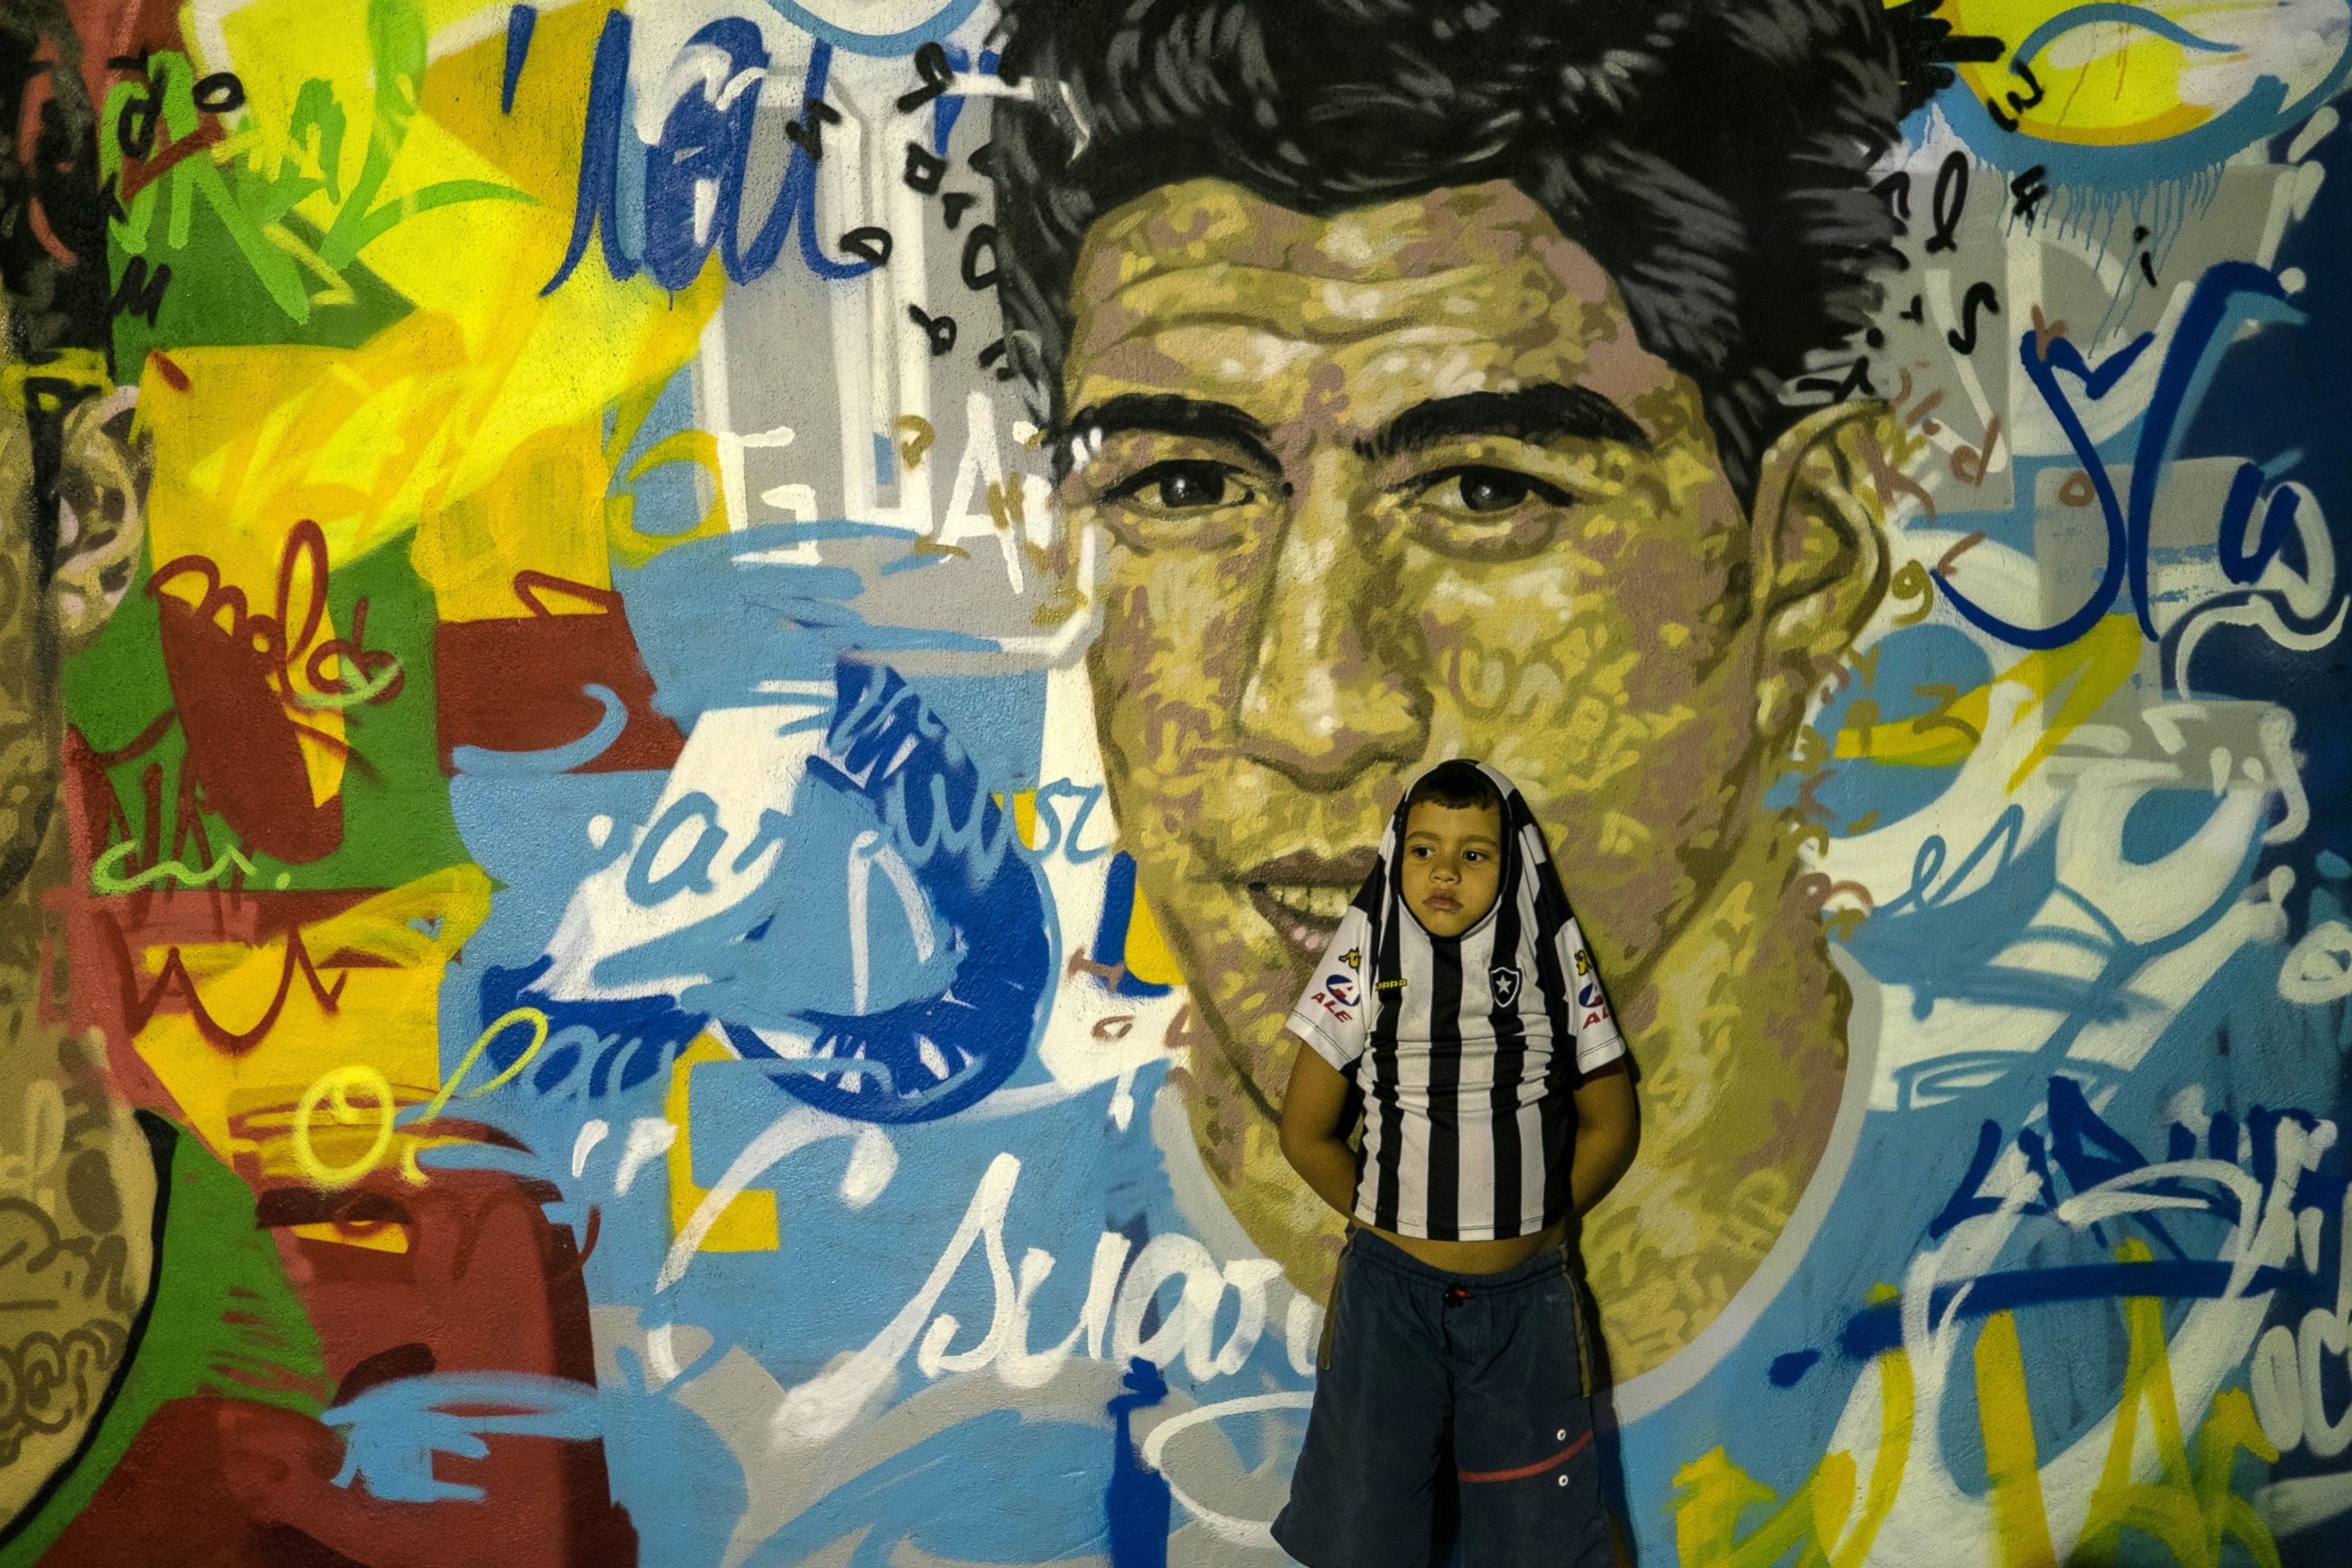 PHOTO: A boy leans on a mural with the portraits of famous football players at Tavares Bastos favela in Rio de Janeiro, Brazil, on May 21, 2014.